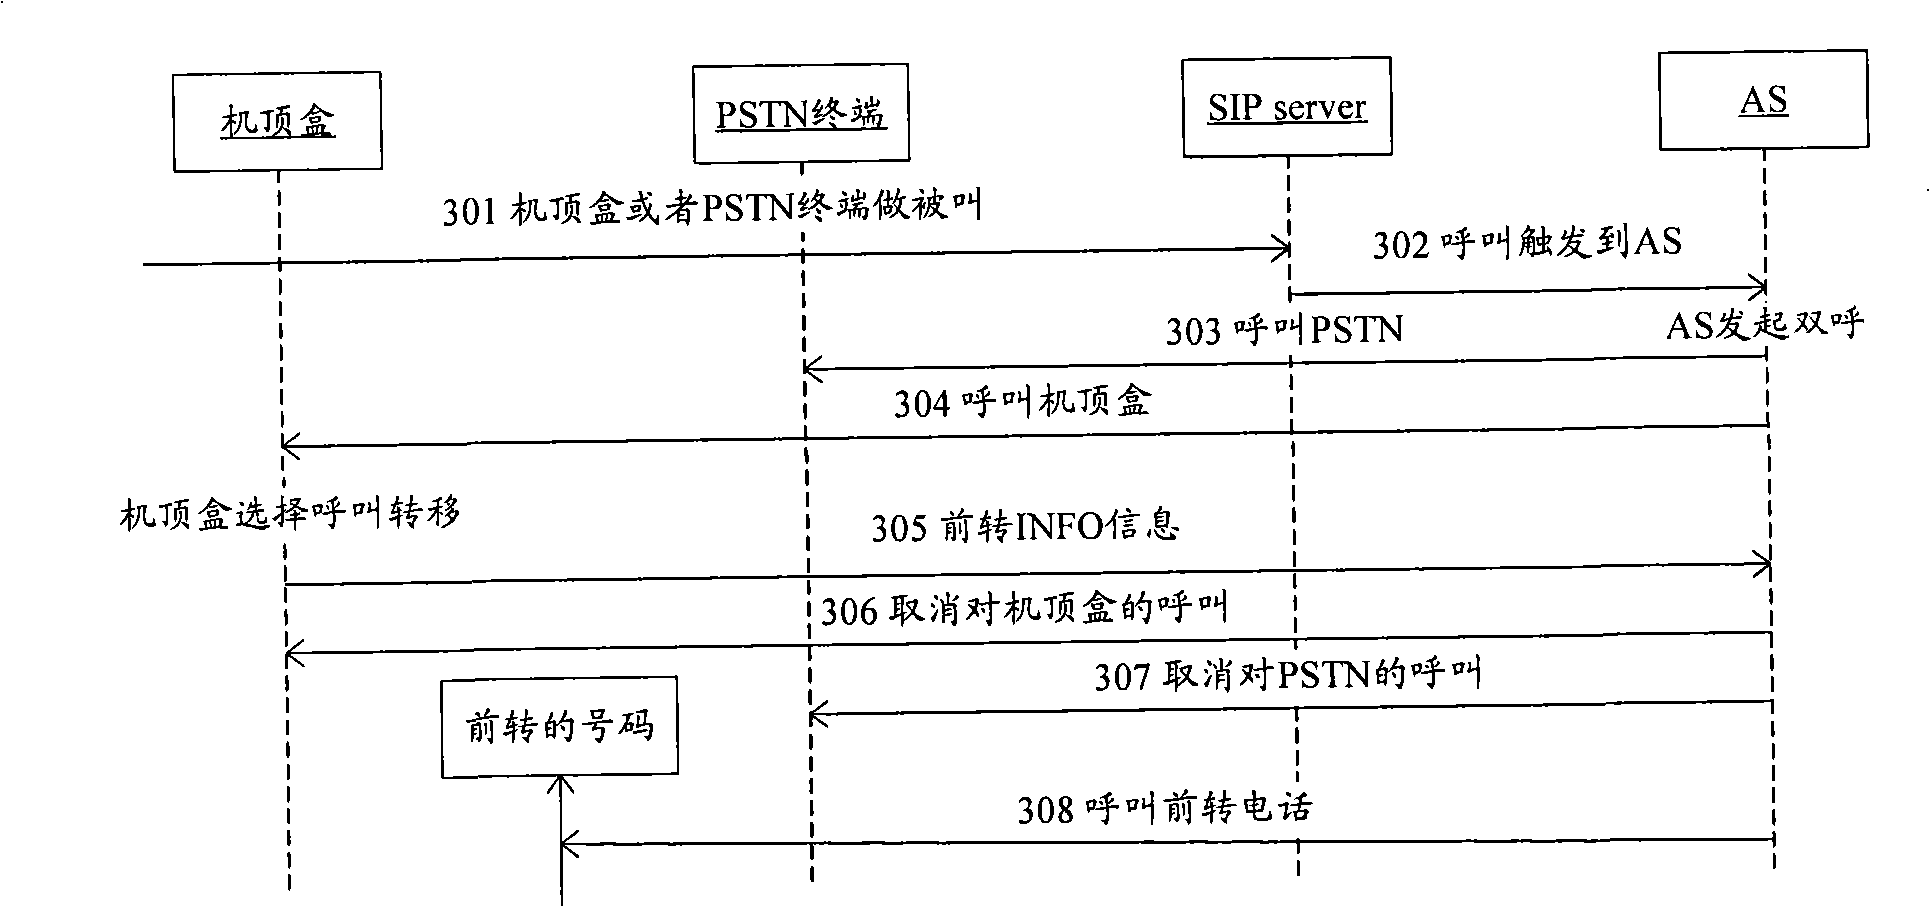 Method and apparatus for implementing call business based on IPTV, application server